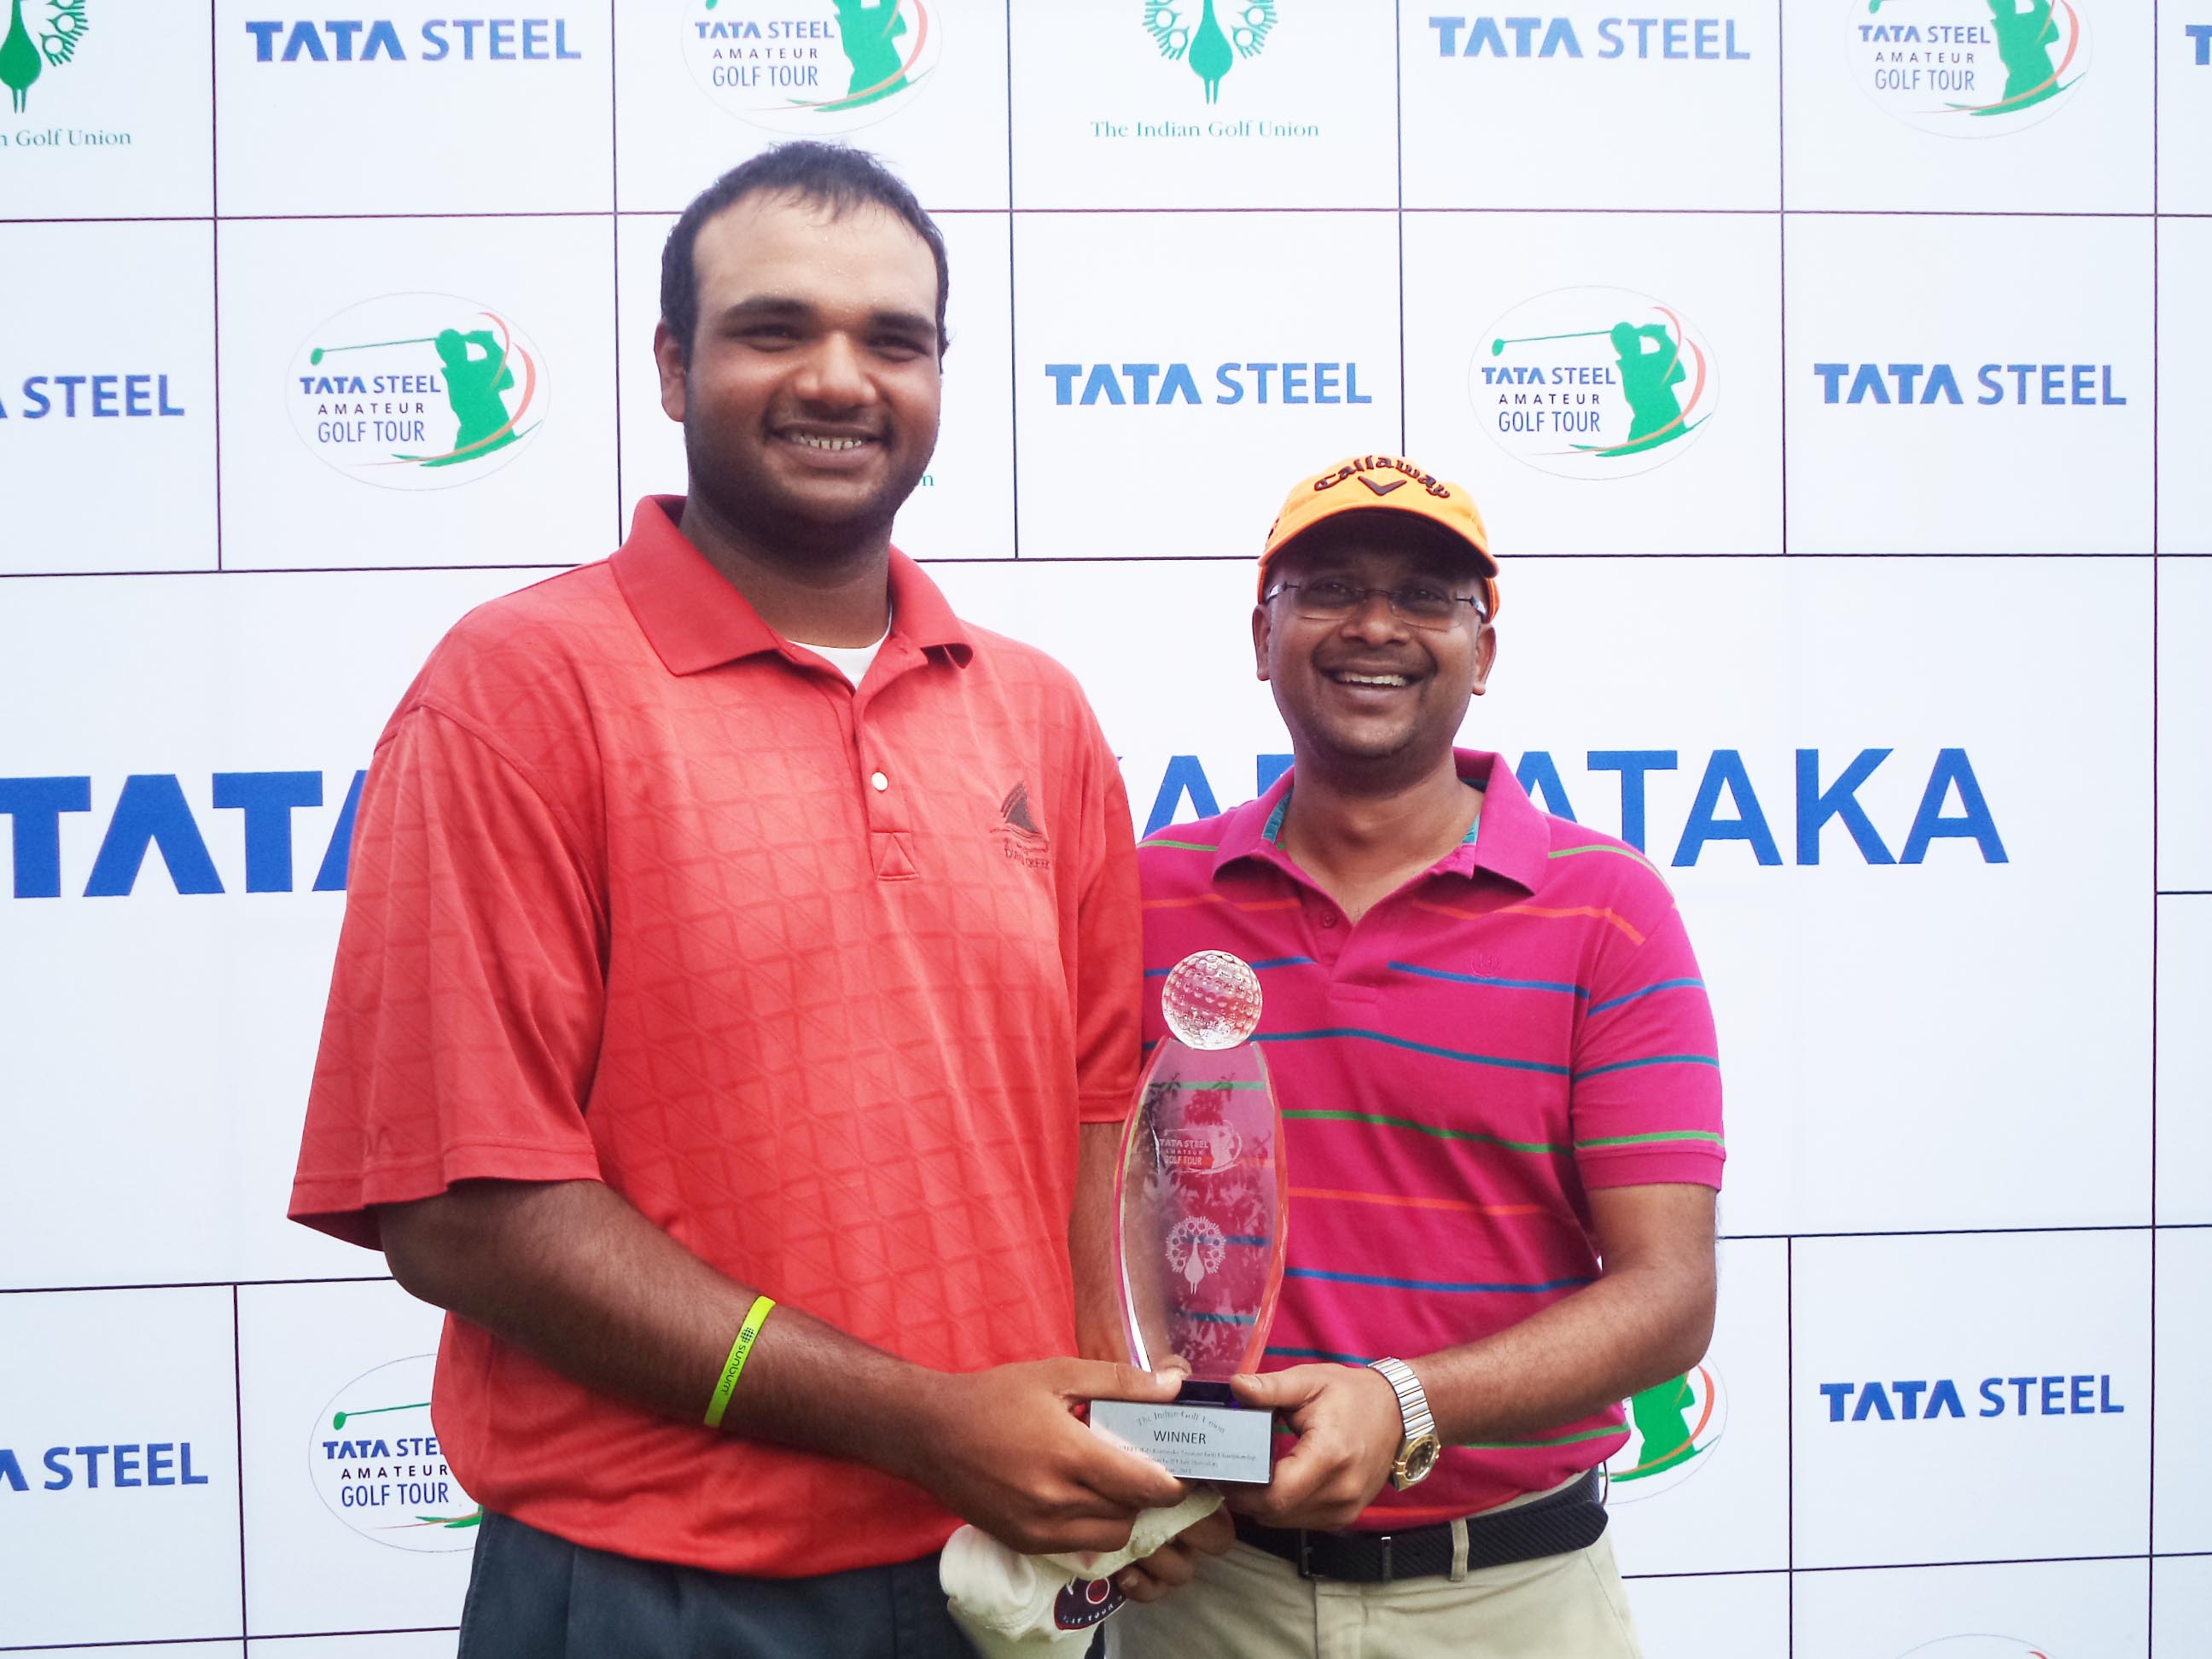 Golf: Udayan Mane seals wire-to-wire victory at Tata Steel 